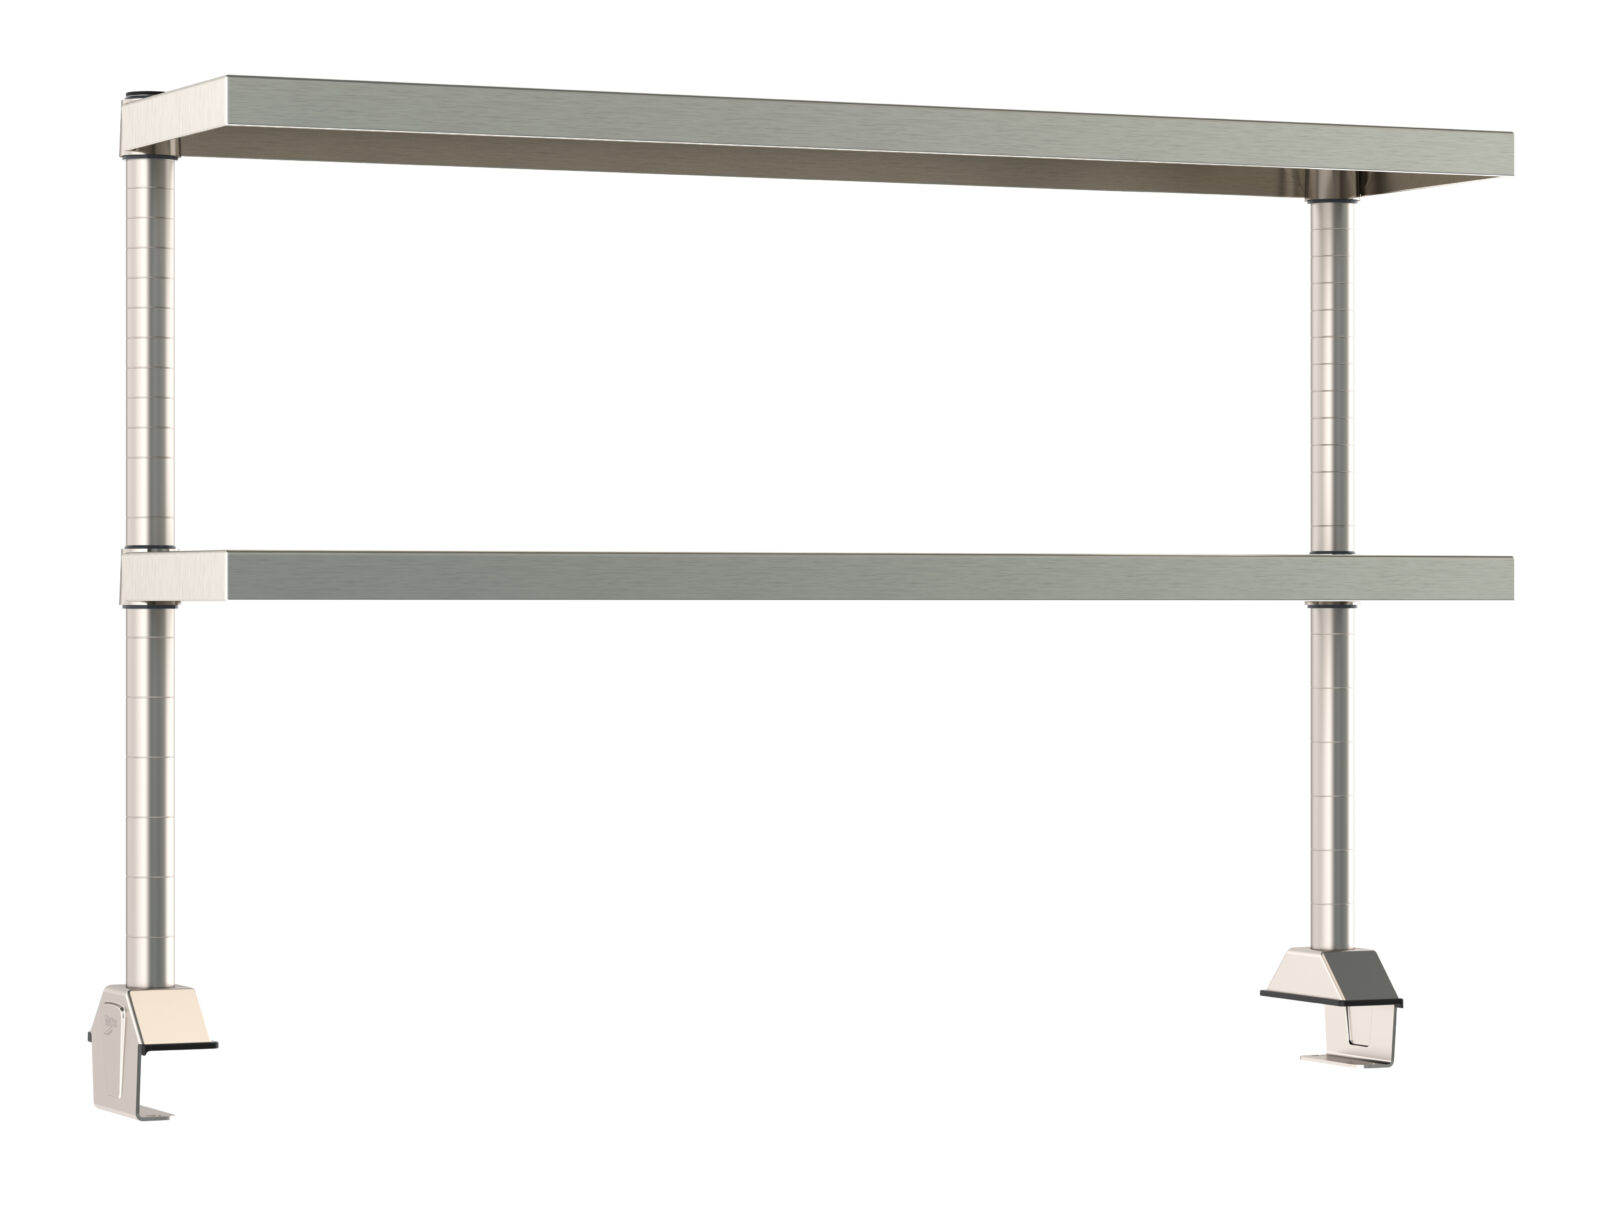 Metro Tableworx 2 Rear Cantilever Stainless Steel Solid Shelf Risers